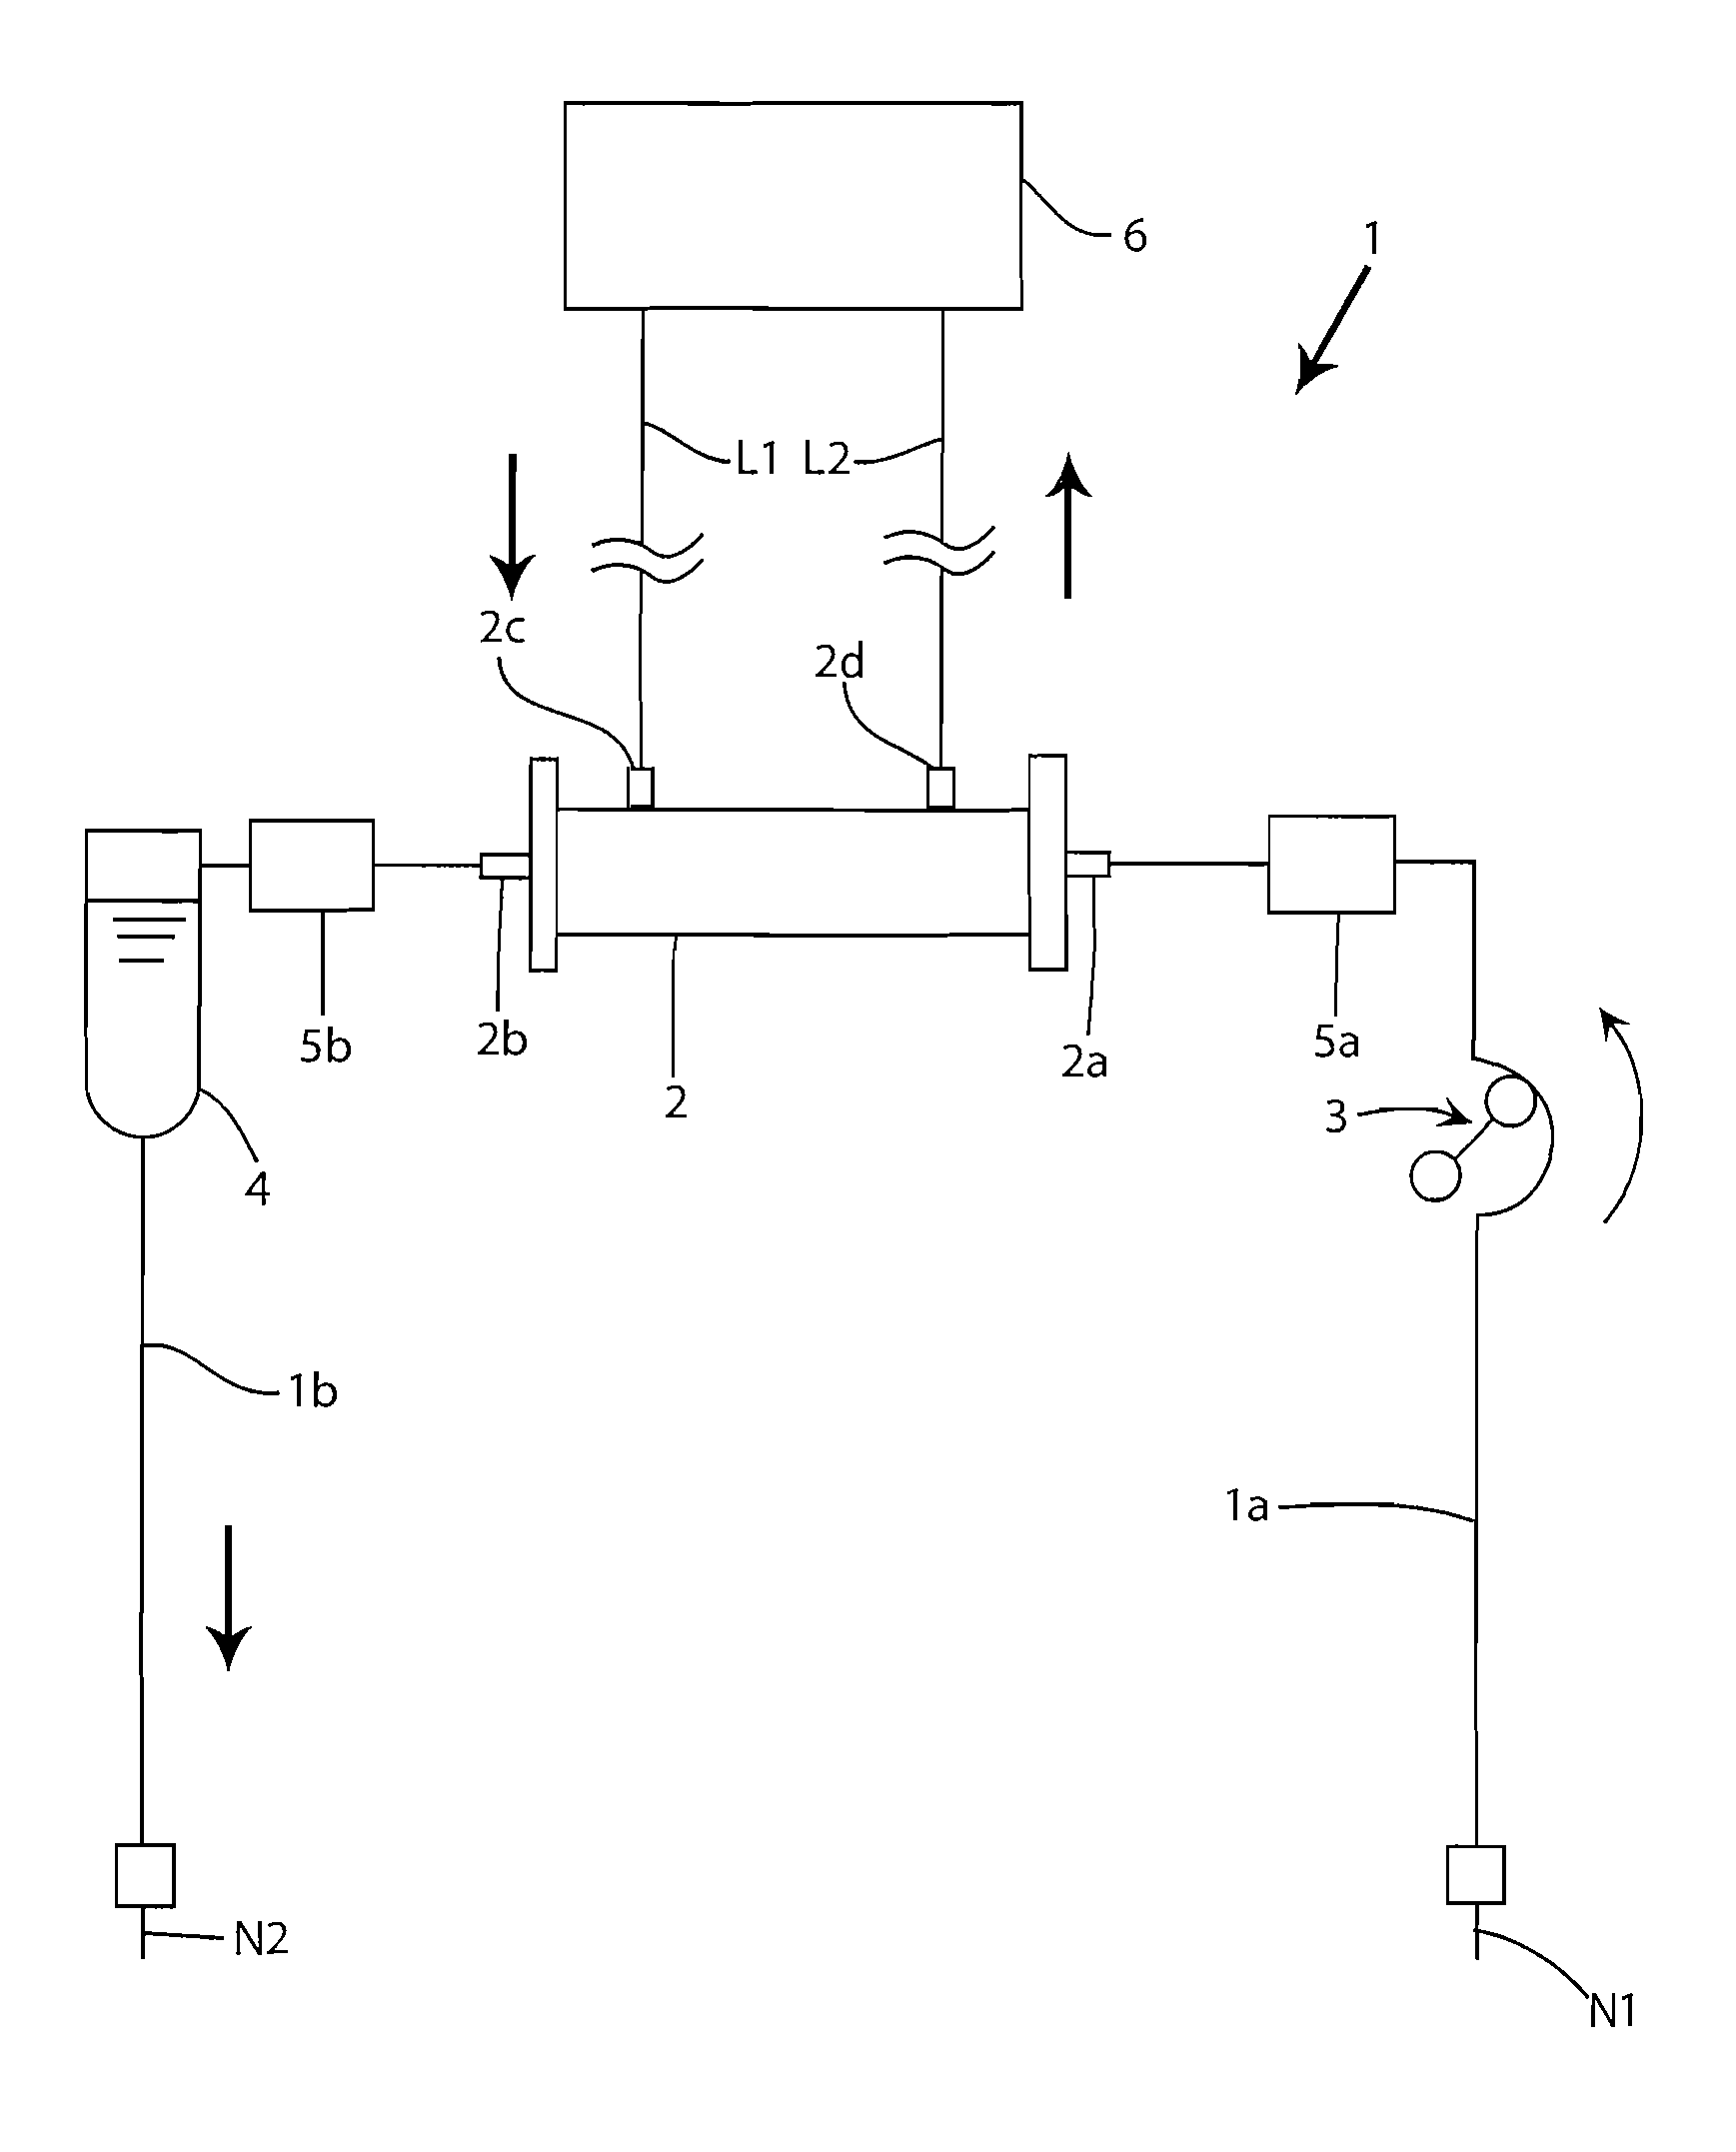 Blood purification apparatus and method for calculating a recirculation rate for the blood purification apparatus